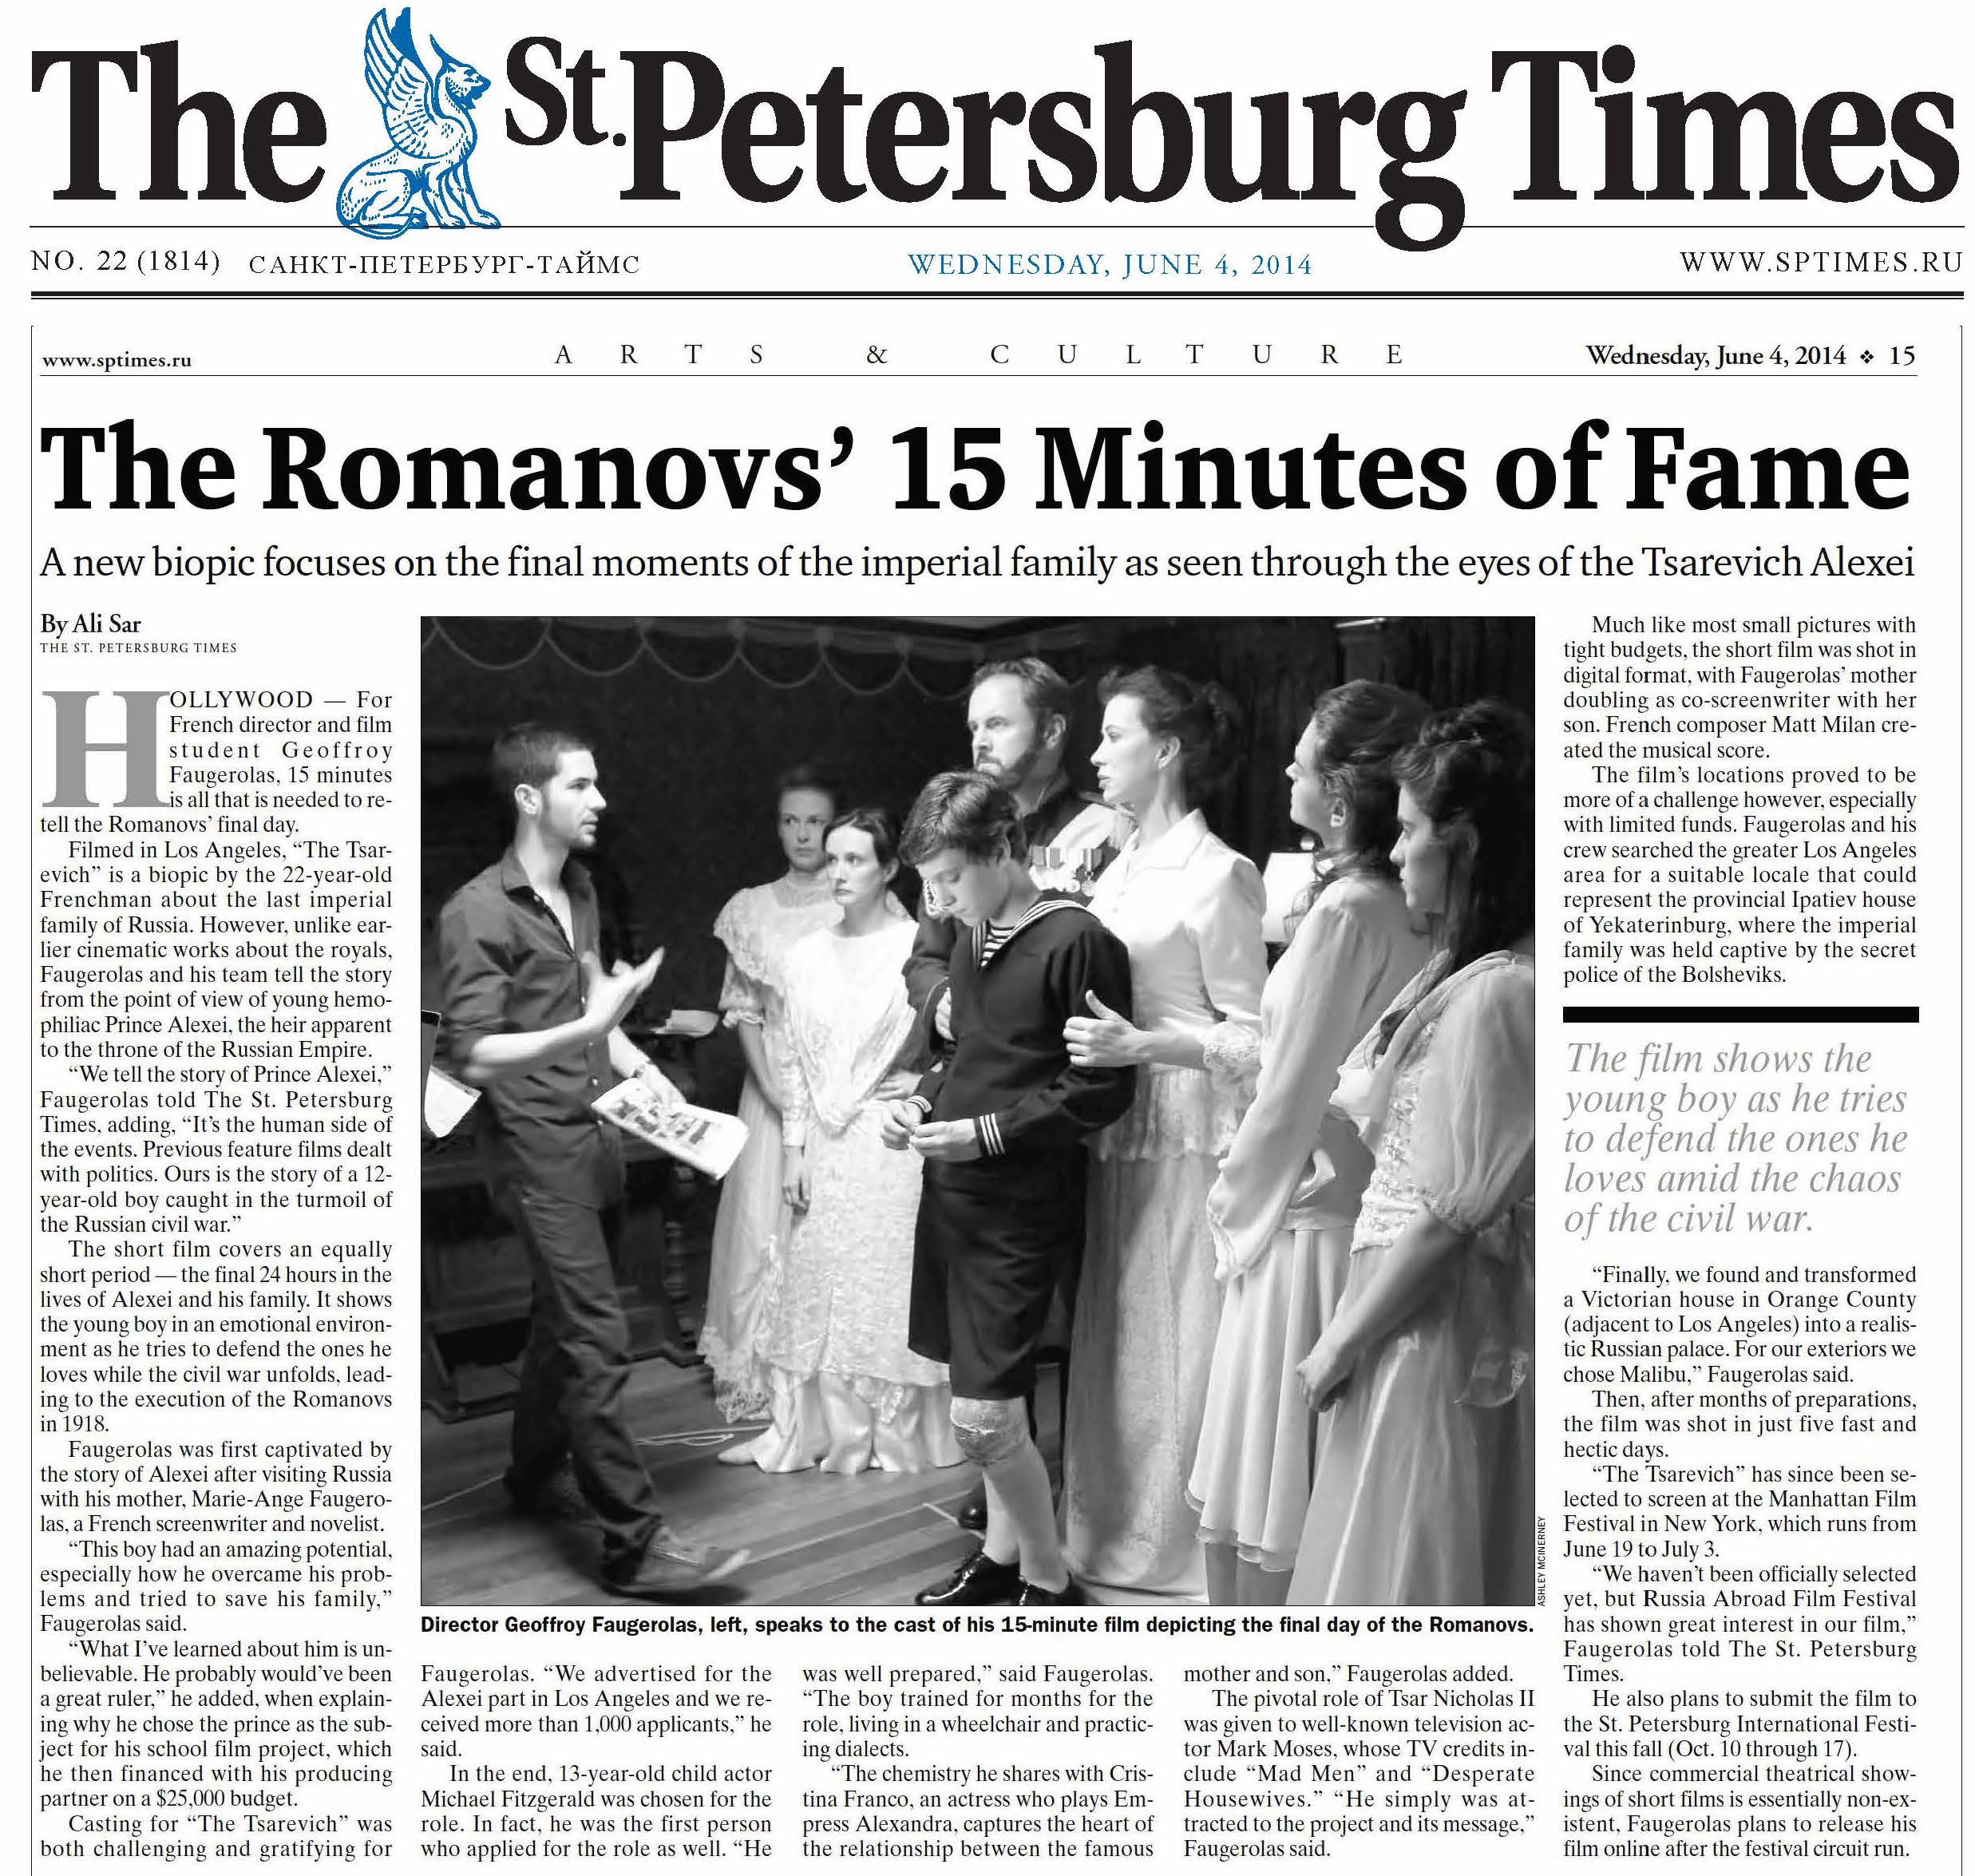 St.Petersburg Times - News article